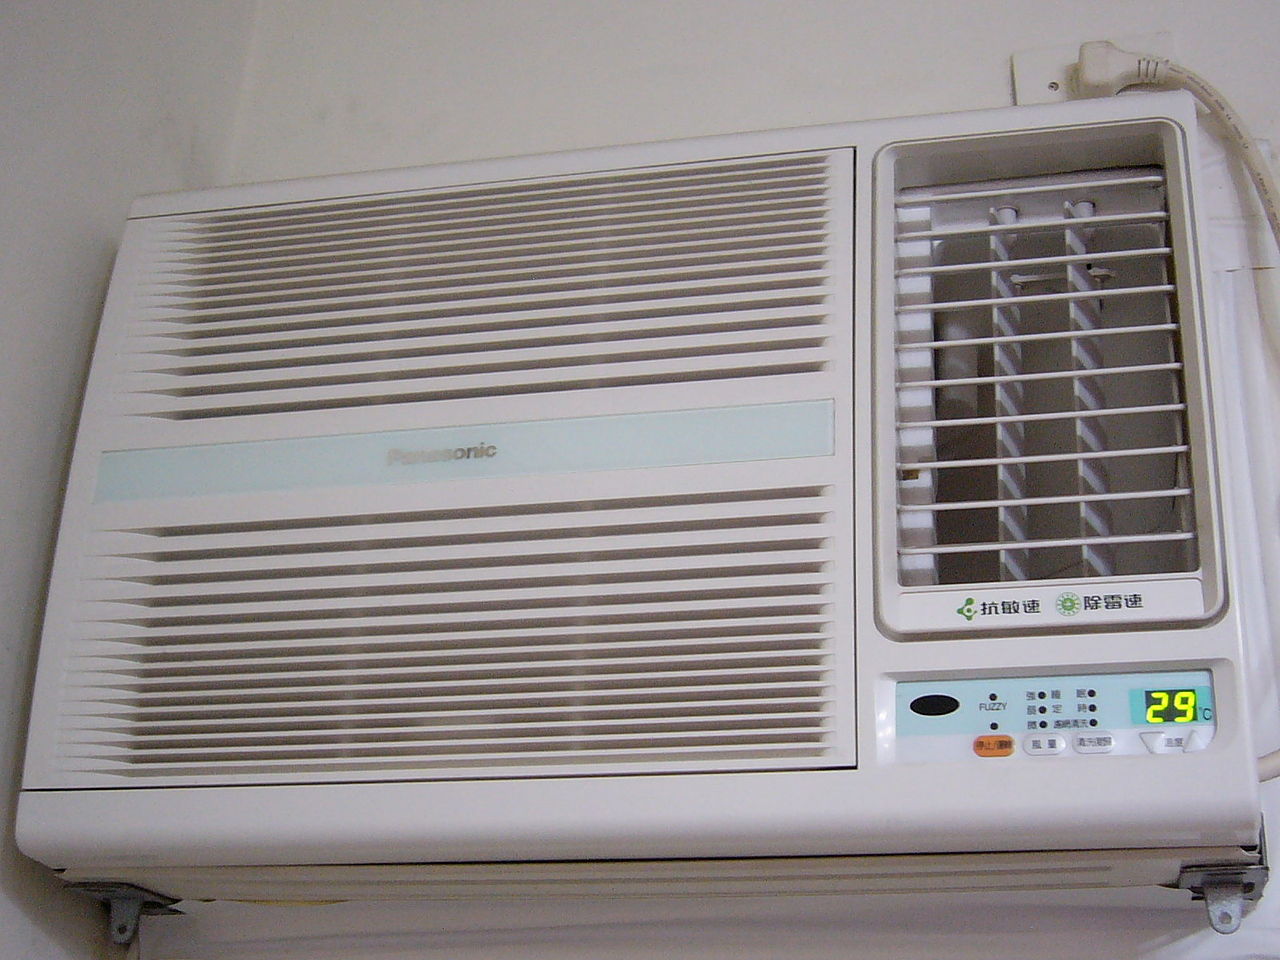 Housing authority massages air conditioner policy